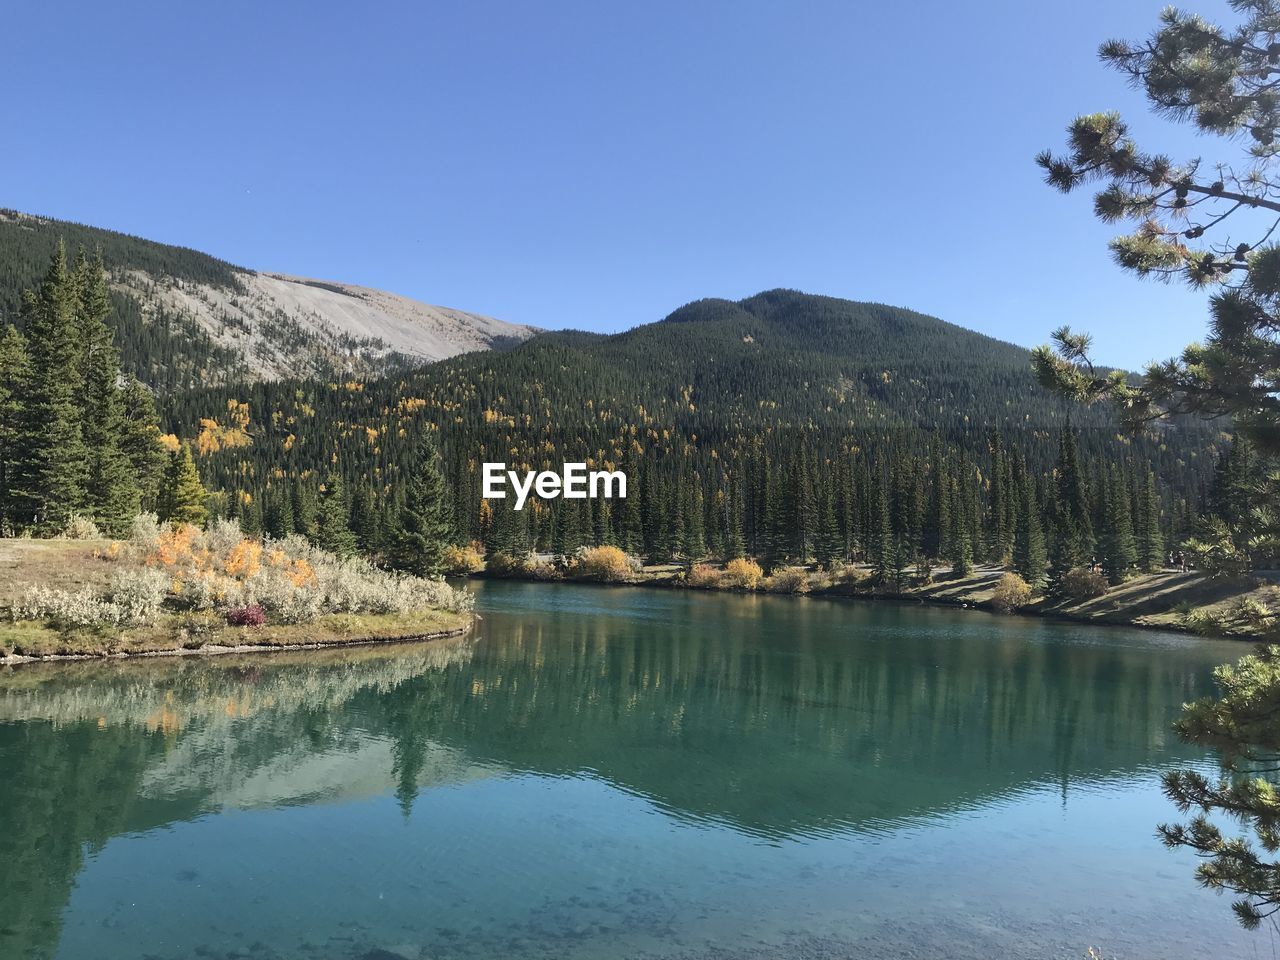 water, reflection, tree, mountain, lake, scenics - nature, plant, body of water, beauty in nature, sky, wilderness, nature, tranquility, tranquil scene, pine tree, mountain range, reservoir, coniferous tree, pinaceae, no people, landscape, forest, pine woodland, environment, land, blue, clear sky, autumn, non-urban scene, travel destinations, day, idyllic, outdoors, travel, woodland, tourism, waterfront